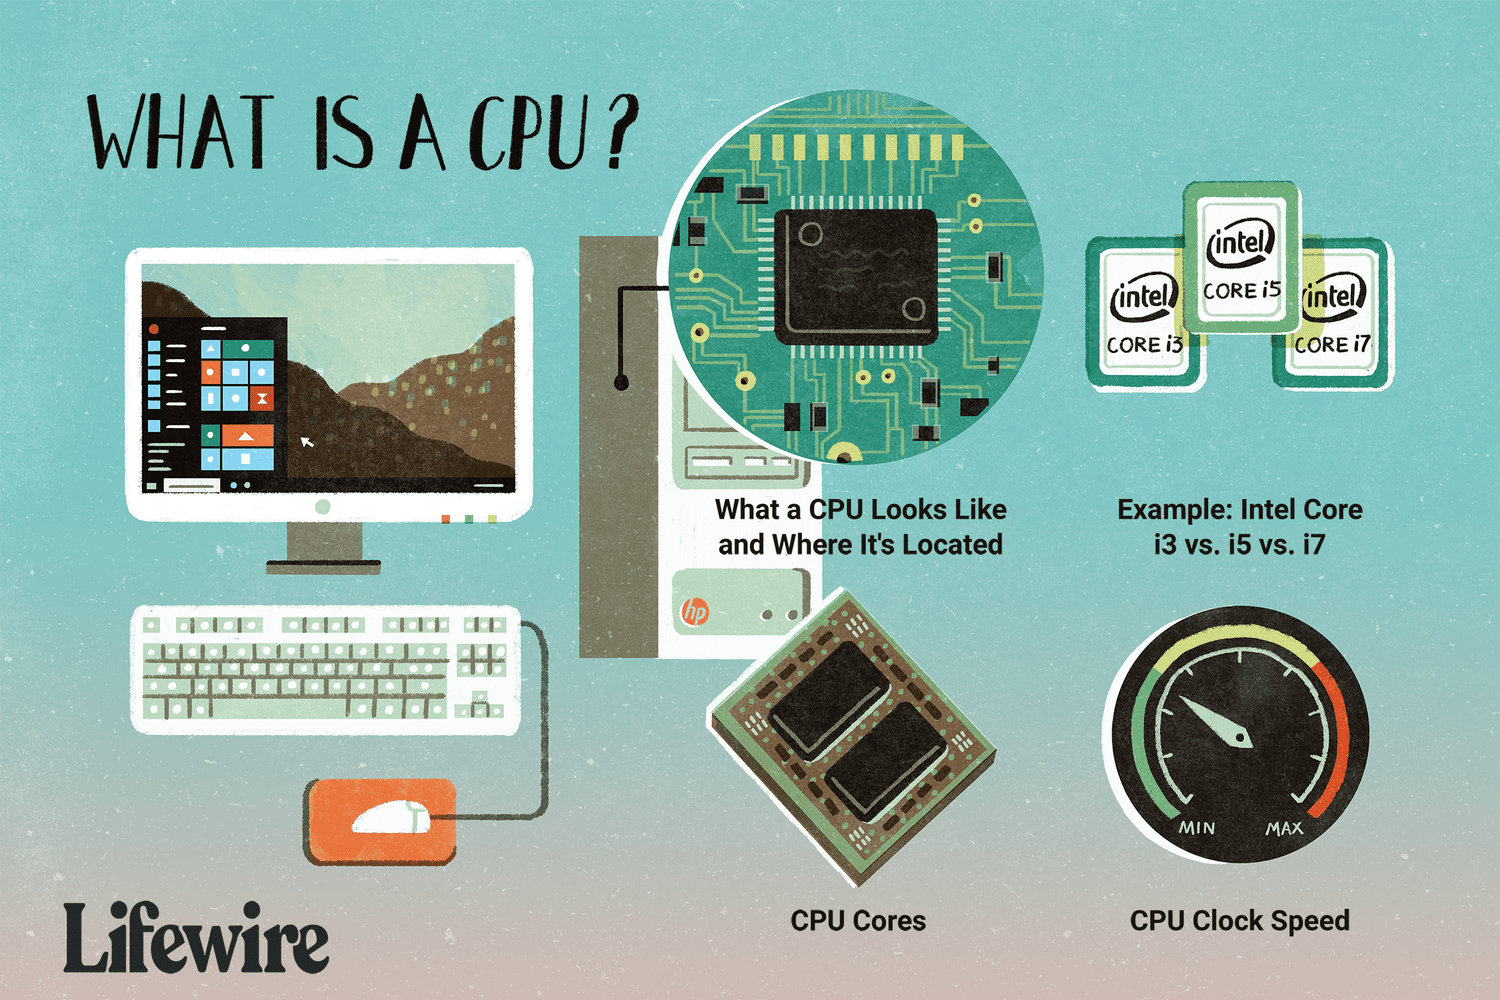 How Does Cpu Look Like? [Physical Appearance of a Processor]